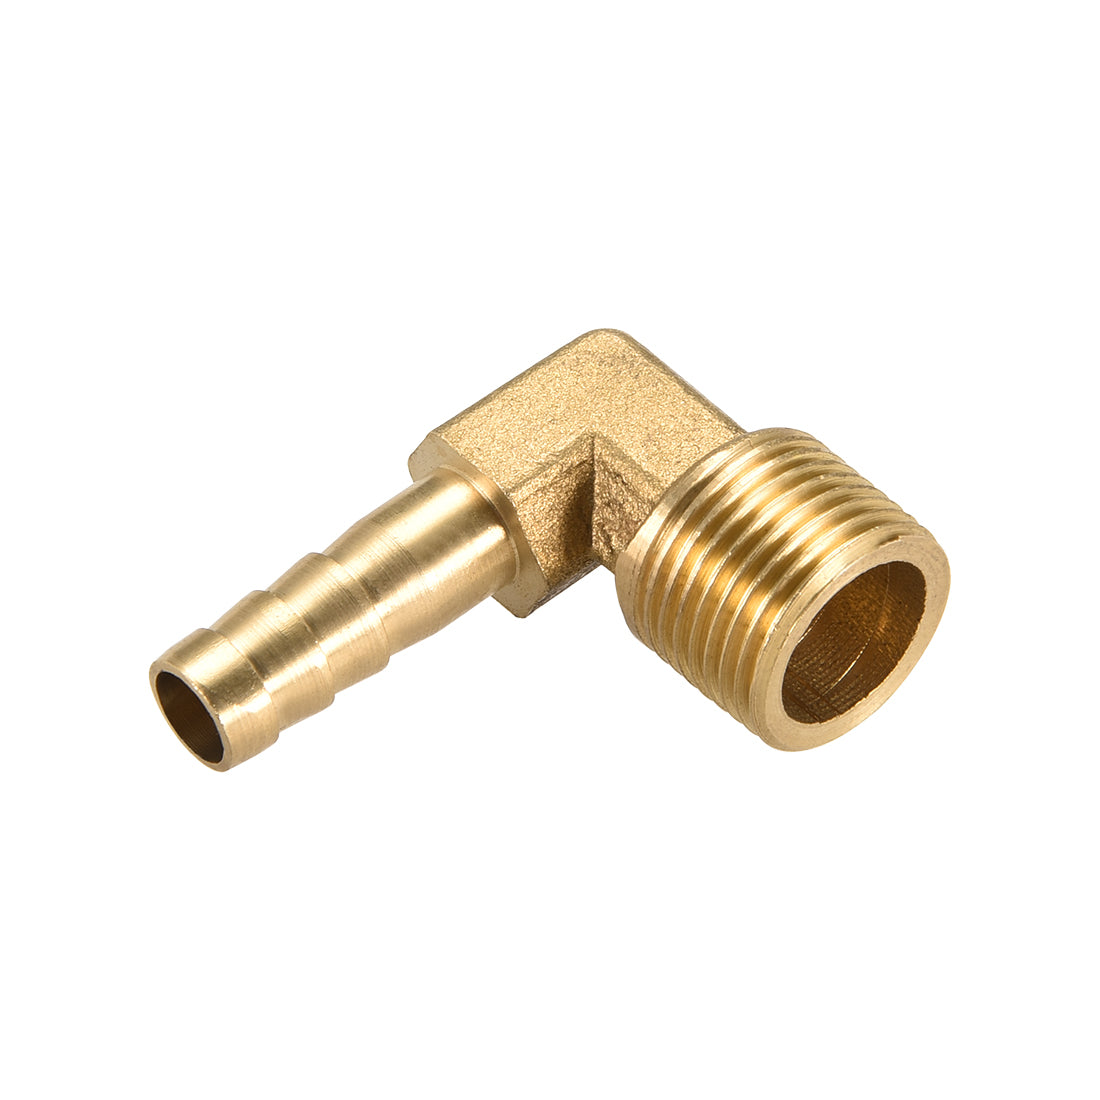 Uxcell Uxcell Brass Barb Hose Fitting 90 Degree Elbow 6mm Barbed x 3/8 PT Male Pipe